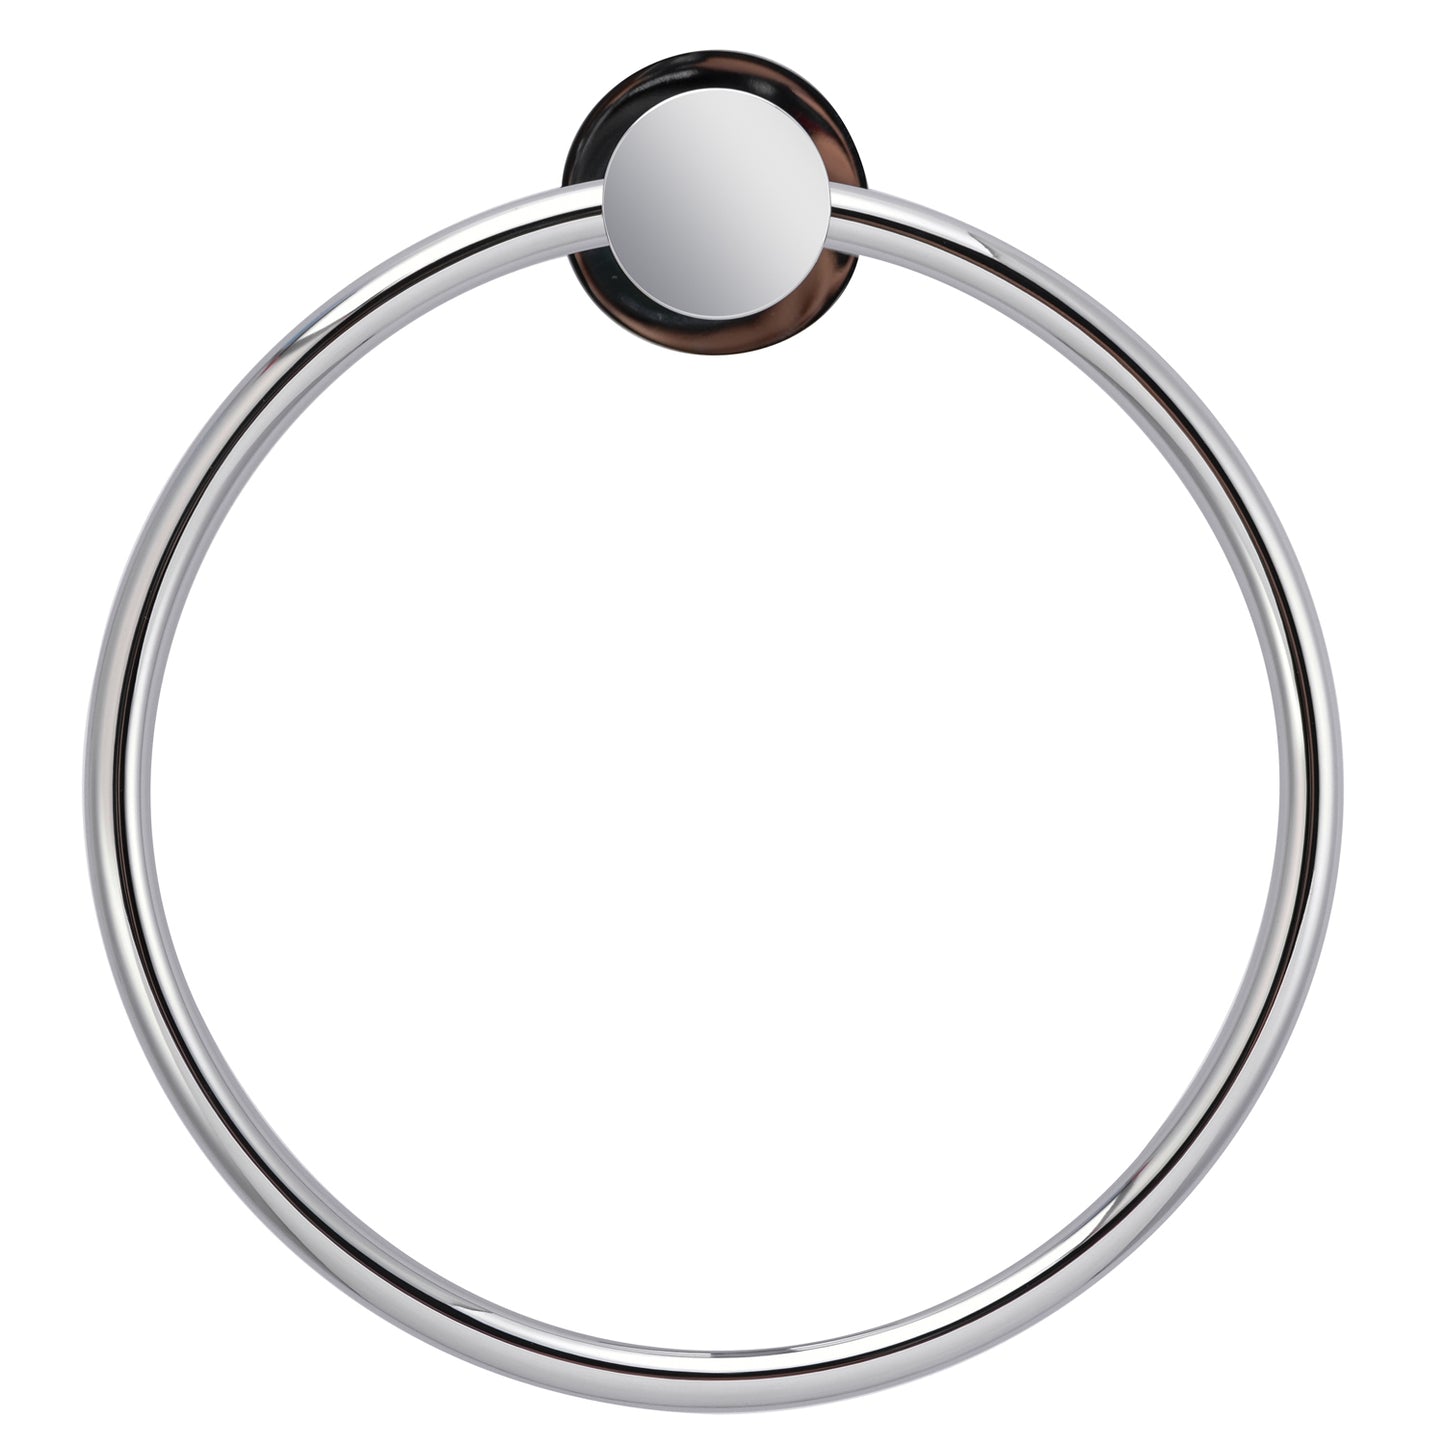 Plumer Towel Ring in Polished Chrome